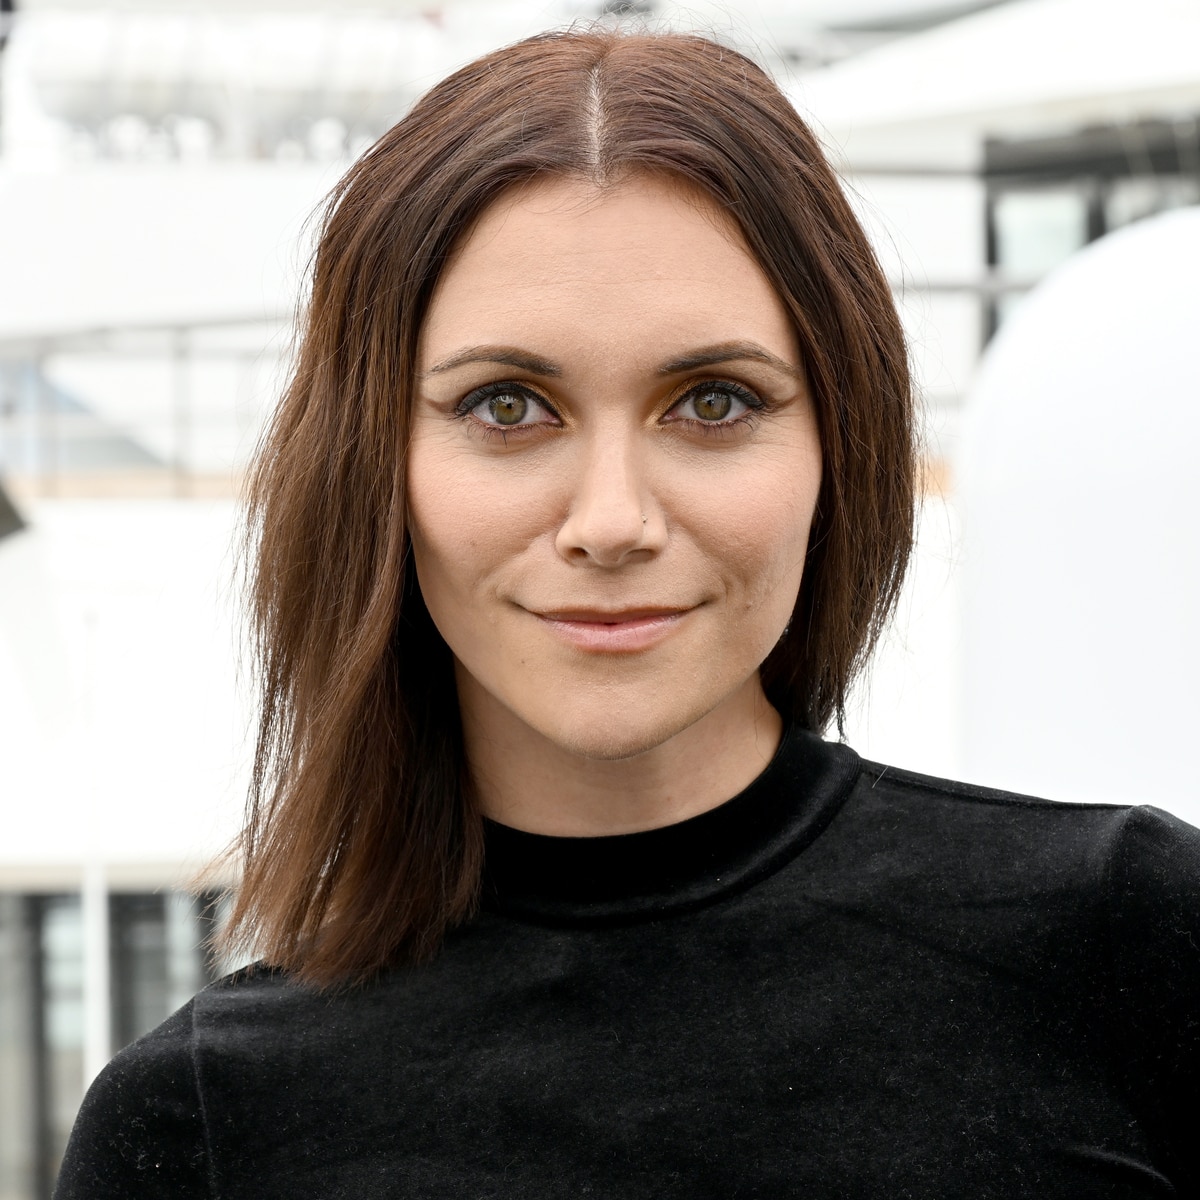 Alyson Stoner Shares Whether They Actually Wanted to Be a Child Star